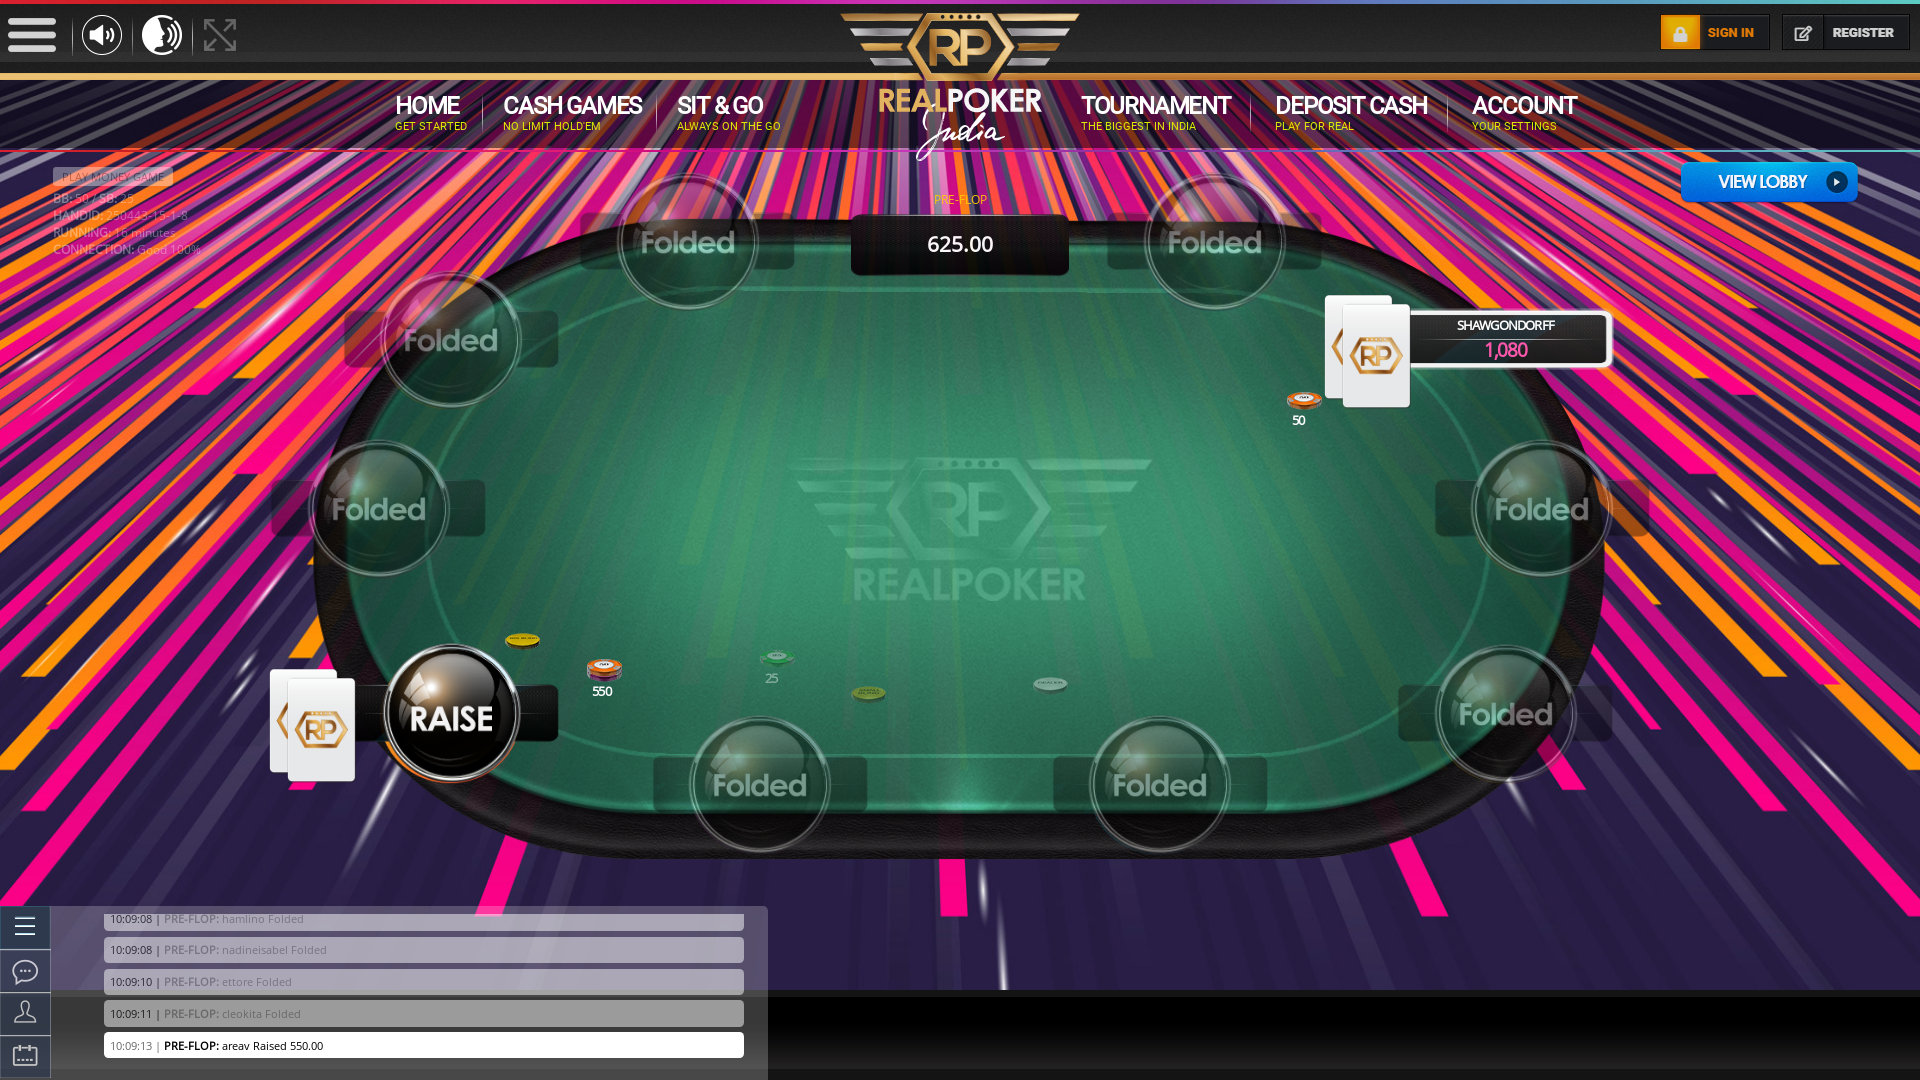 Real poker 10 player table in the 15th minute of the match